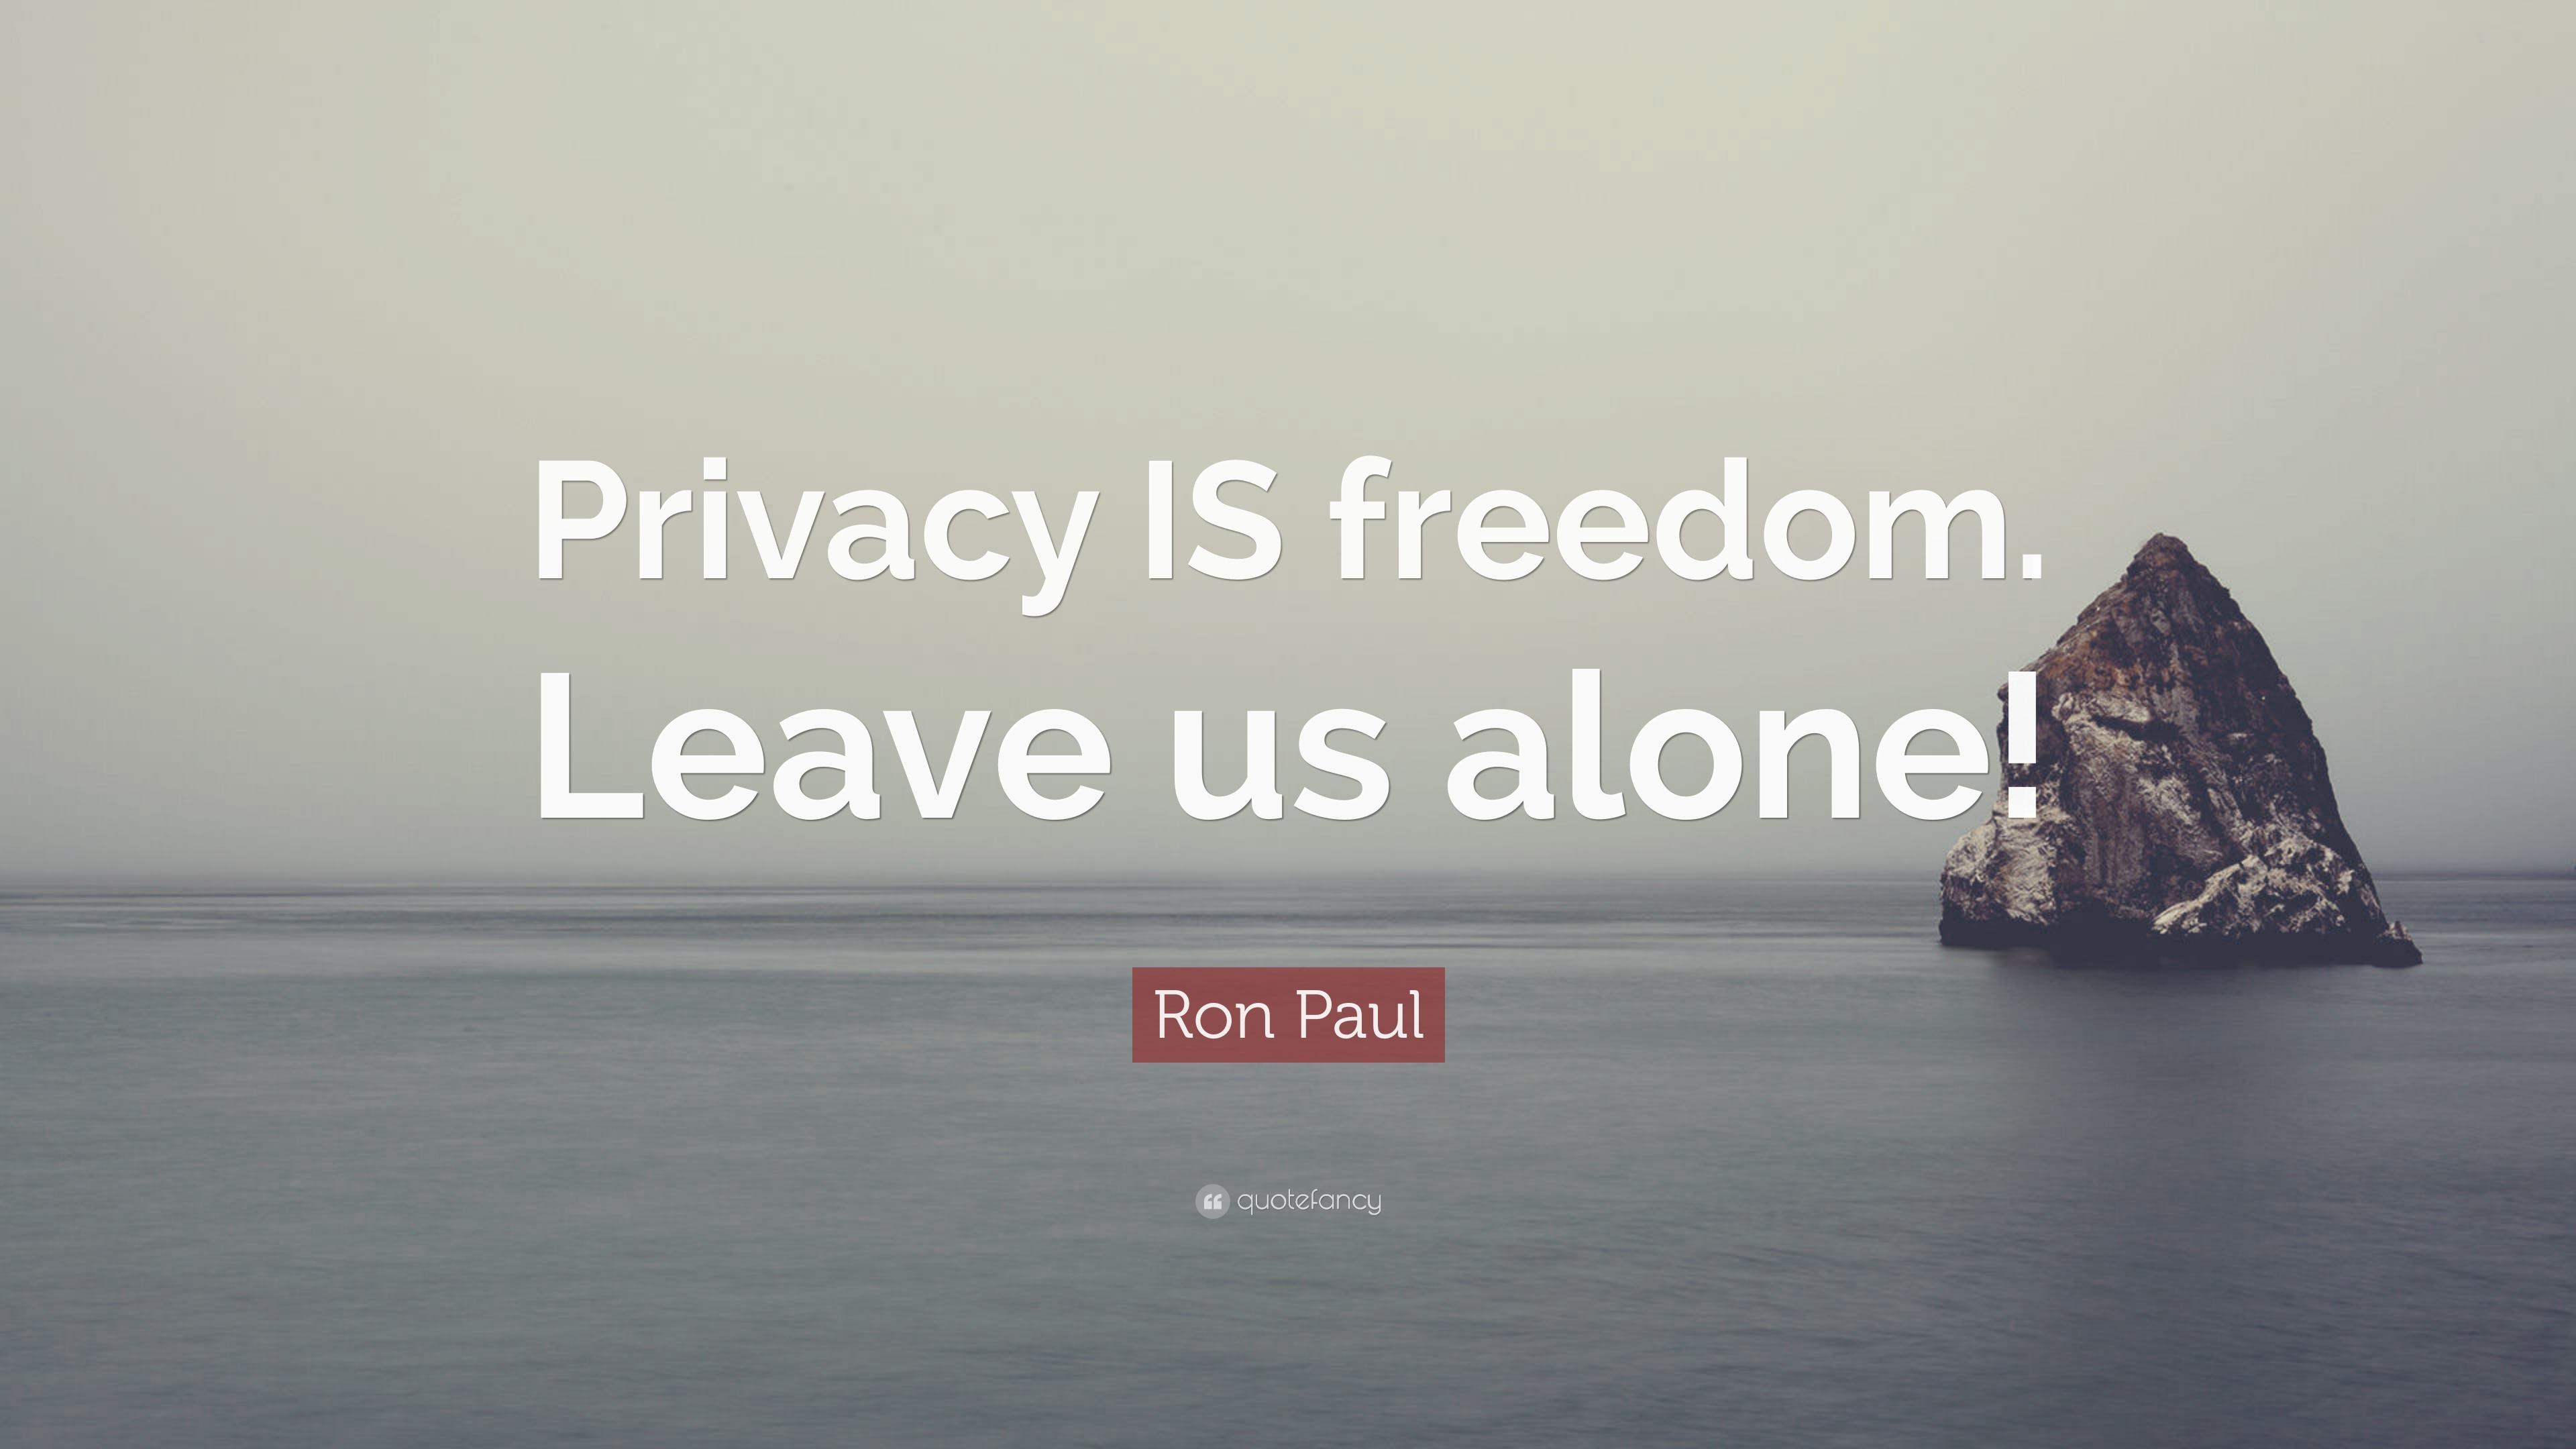 Ron Paul Quote: “Privacy IS freedom. Leave us alone!” 10 wallpaper